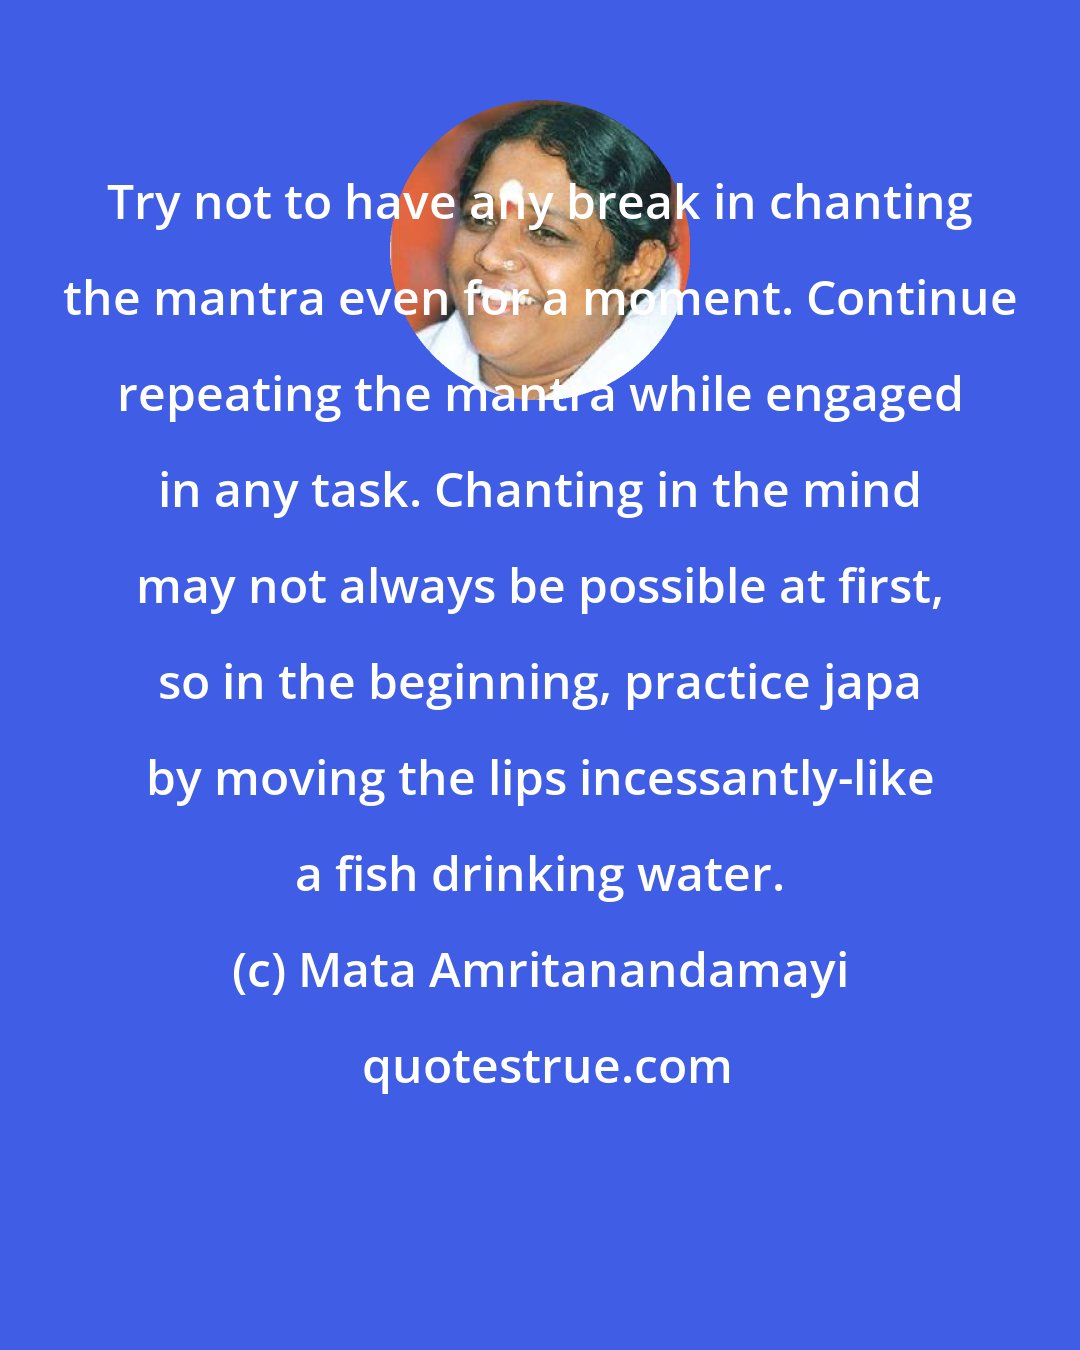 Mata Amritanandamayi: Try not to have any break in chanting the mantra even for a moment. Continue repeating the mantra while engaged in any task. Chanting in the mind may not always be possible at first, so in the beginning, practice japa by moving the lips incessantly-like a fish drinking water.